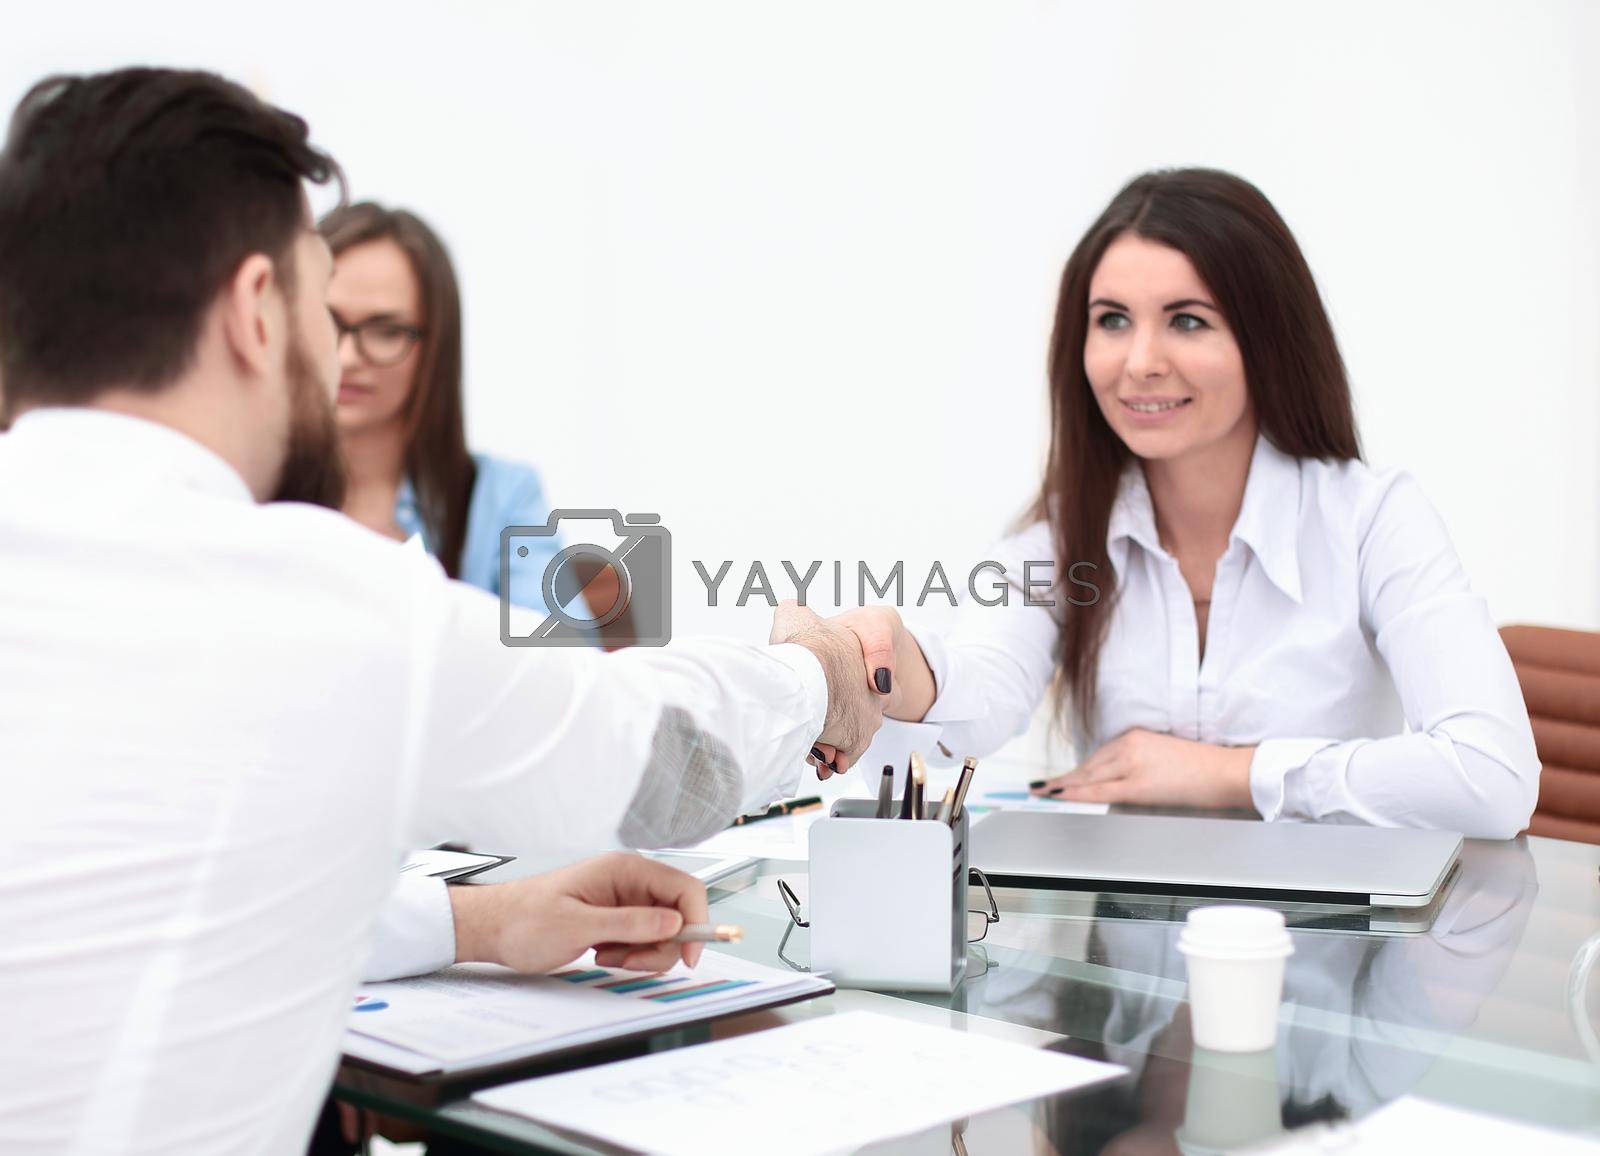 Royalty free image of business woman is shaking hands with an employee at a work meeting by SmartPhotoLab